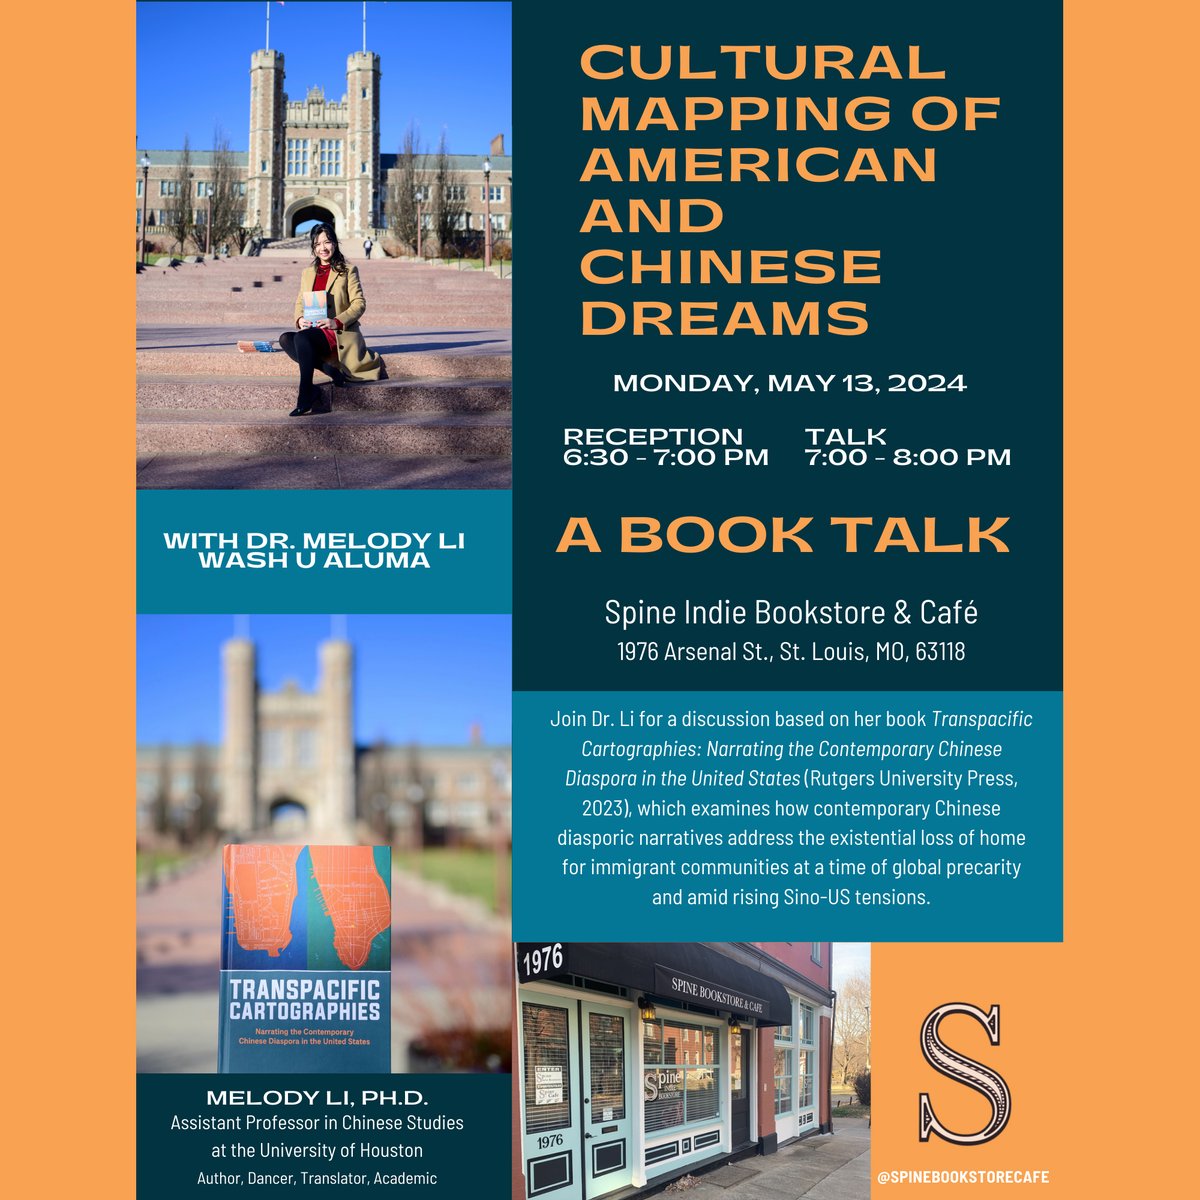 Melody Yunzi Li, author of 'Transpacific Cartographies: Narrating the Contemporary Chinese Diaspora in the United States' will be speaking about her book. Spine Indie Bookstore and Cafe St.Louis, MO Monday, May 13 at 7 pm spinebookstorecafe.com #ChineseDiaspora